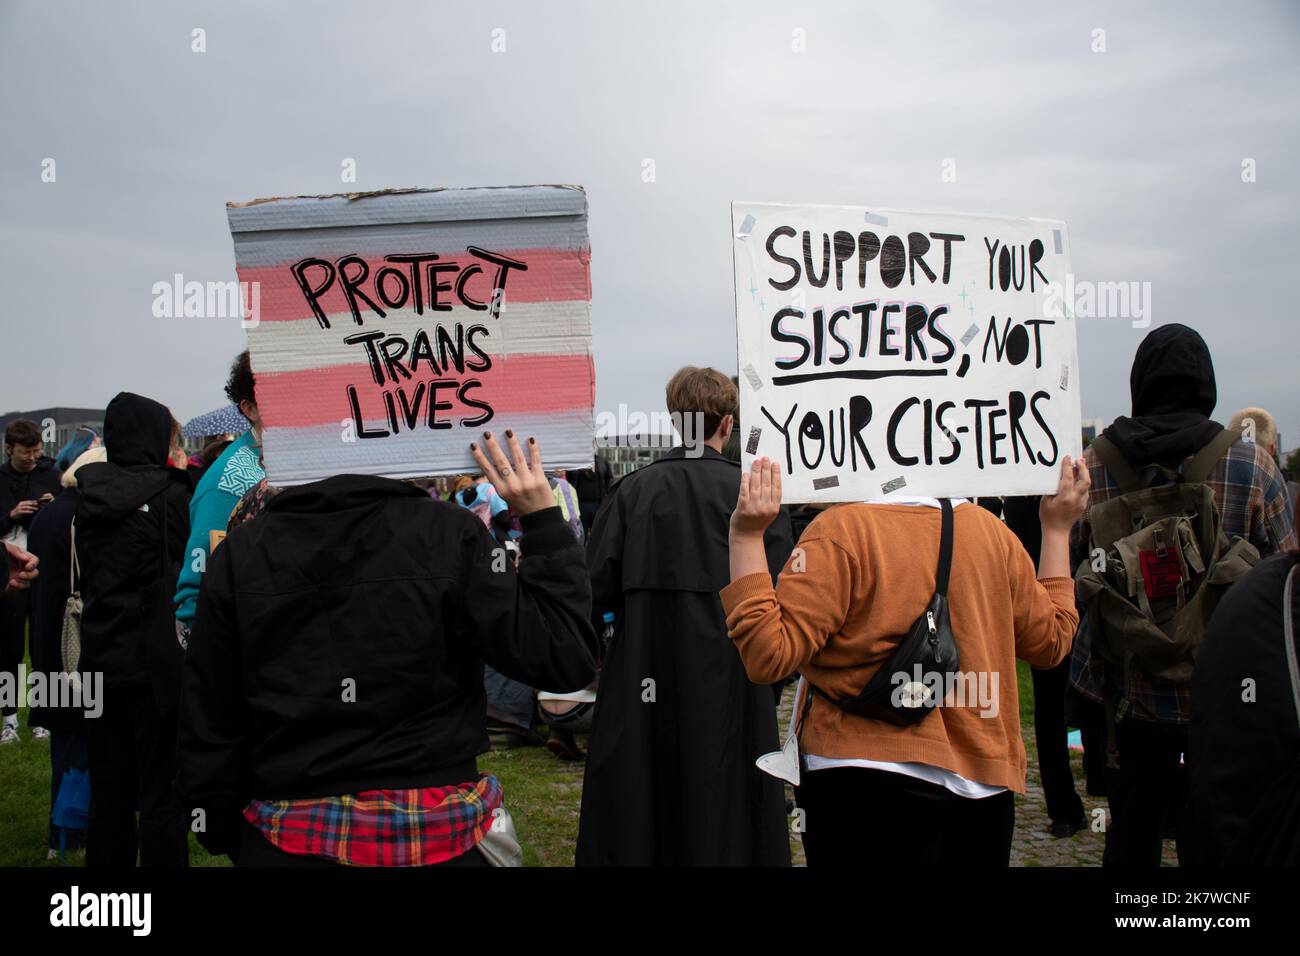 Transgender rights protesters holds up a signs at a demonstration against Terfs in Berlin, Germany Stock Photo